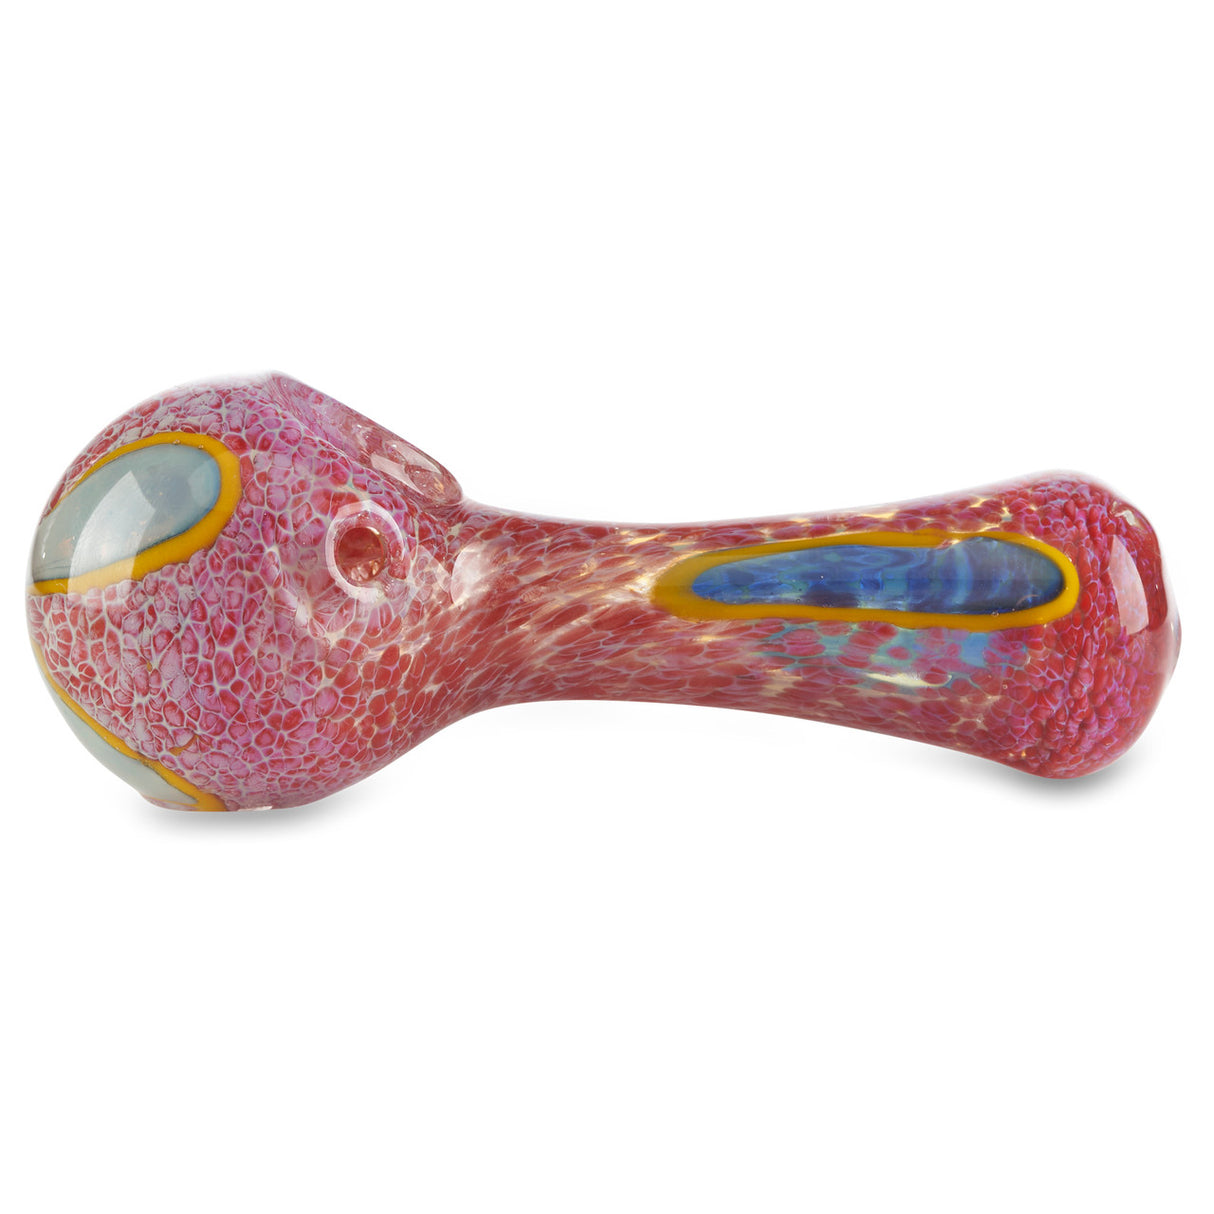 trippy hand pipe glass bowl for smoking herbs